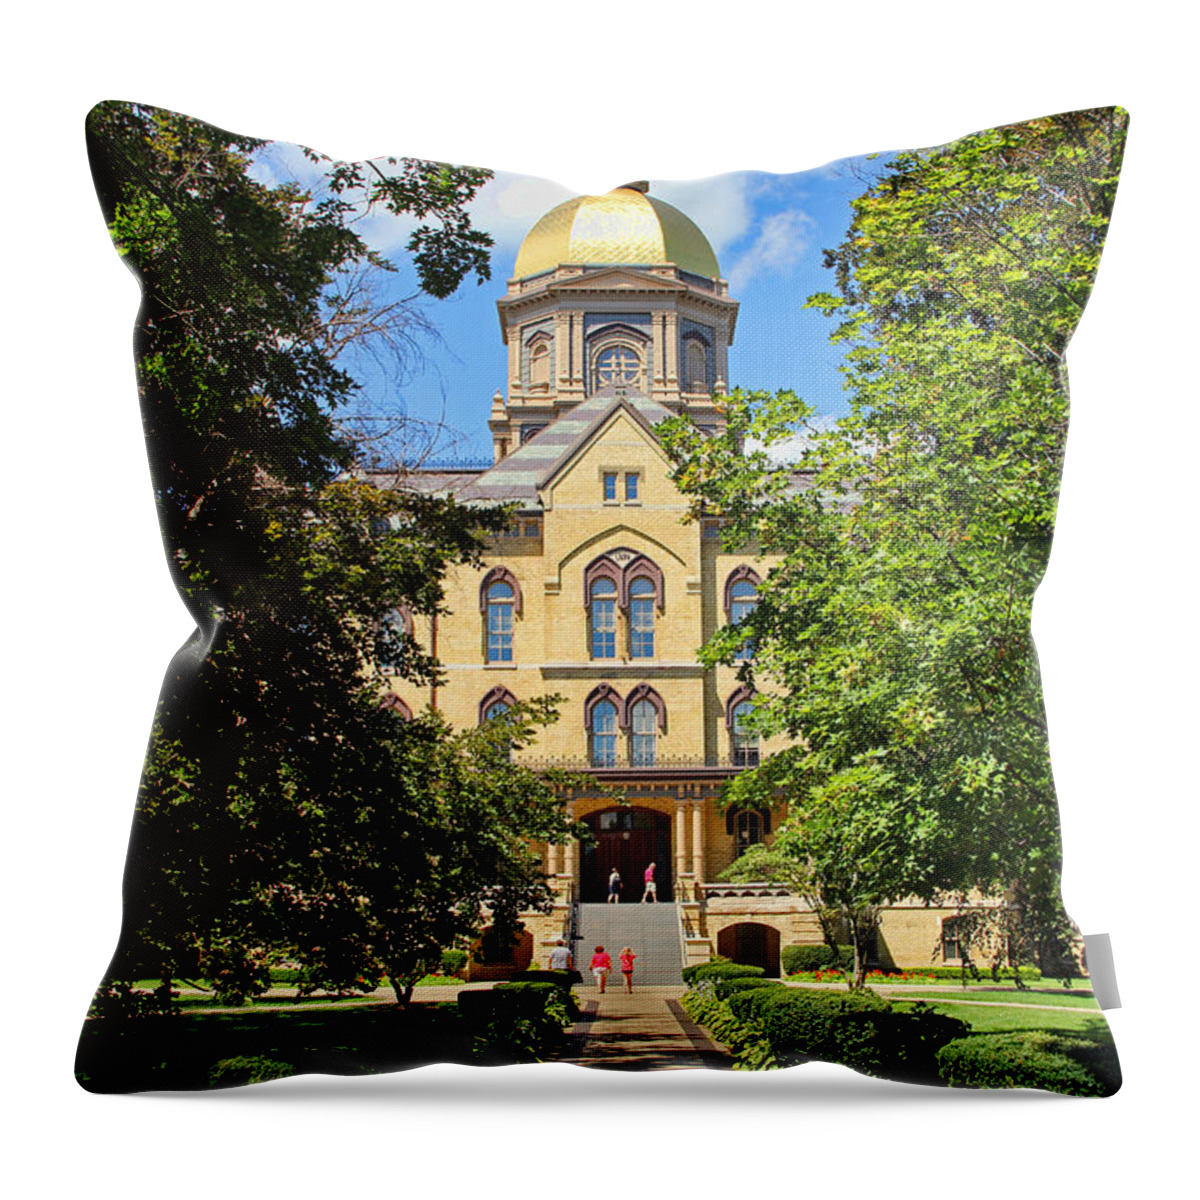 Notre Dame University Throw Pillow featuring the photograph Notre Dame University Main Building 2518 by Jack Schultz